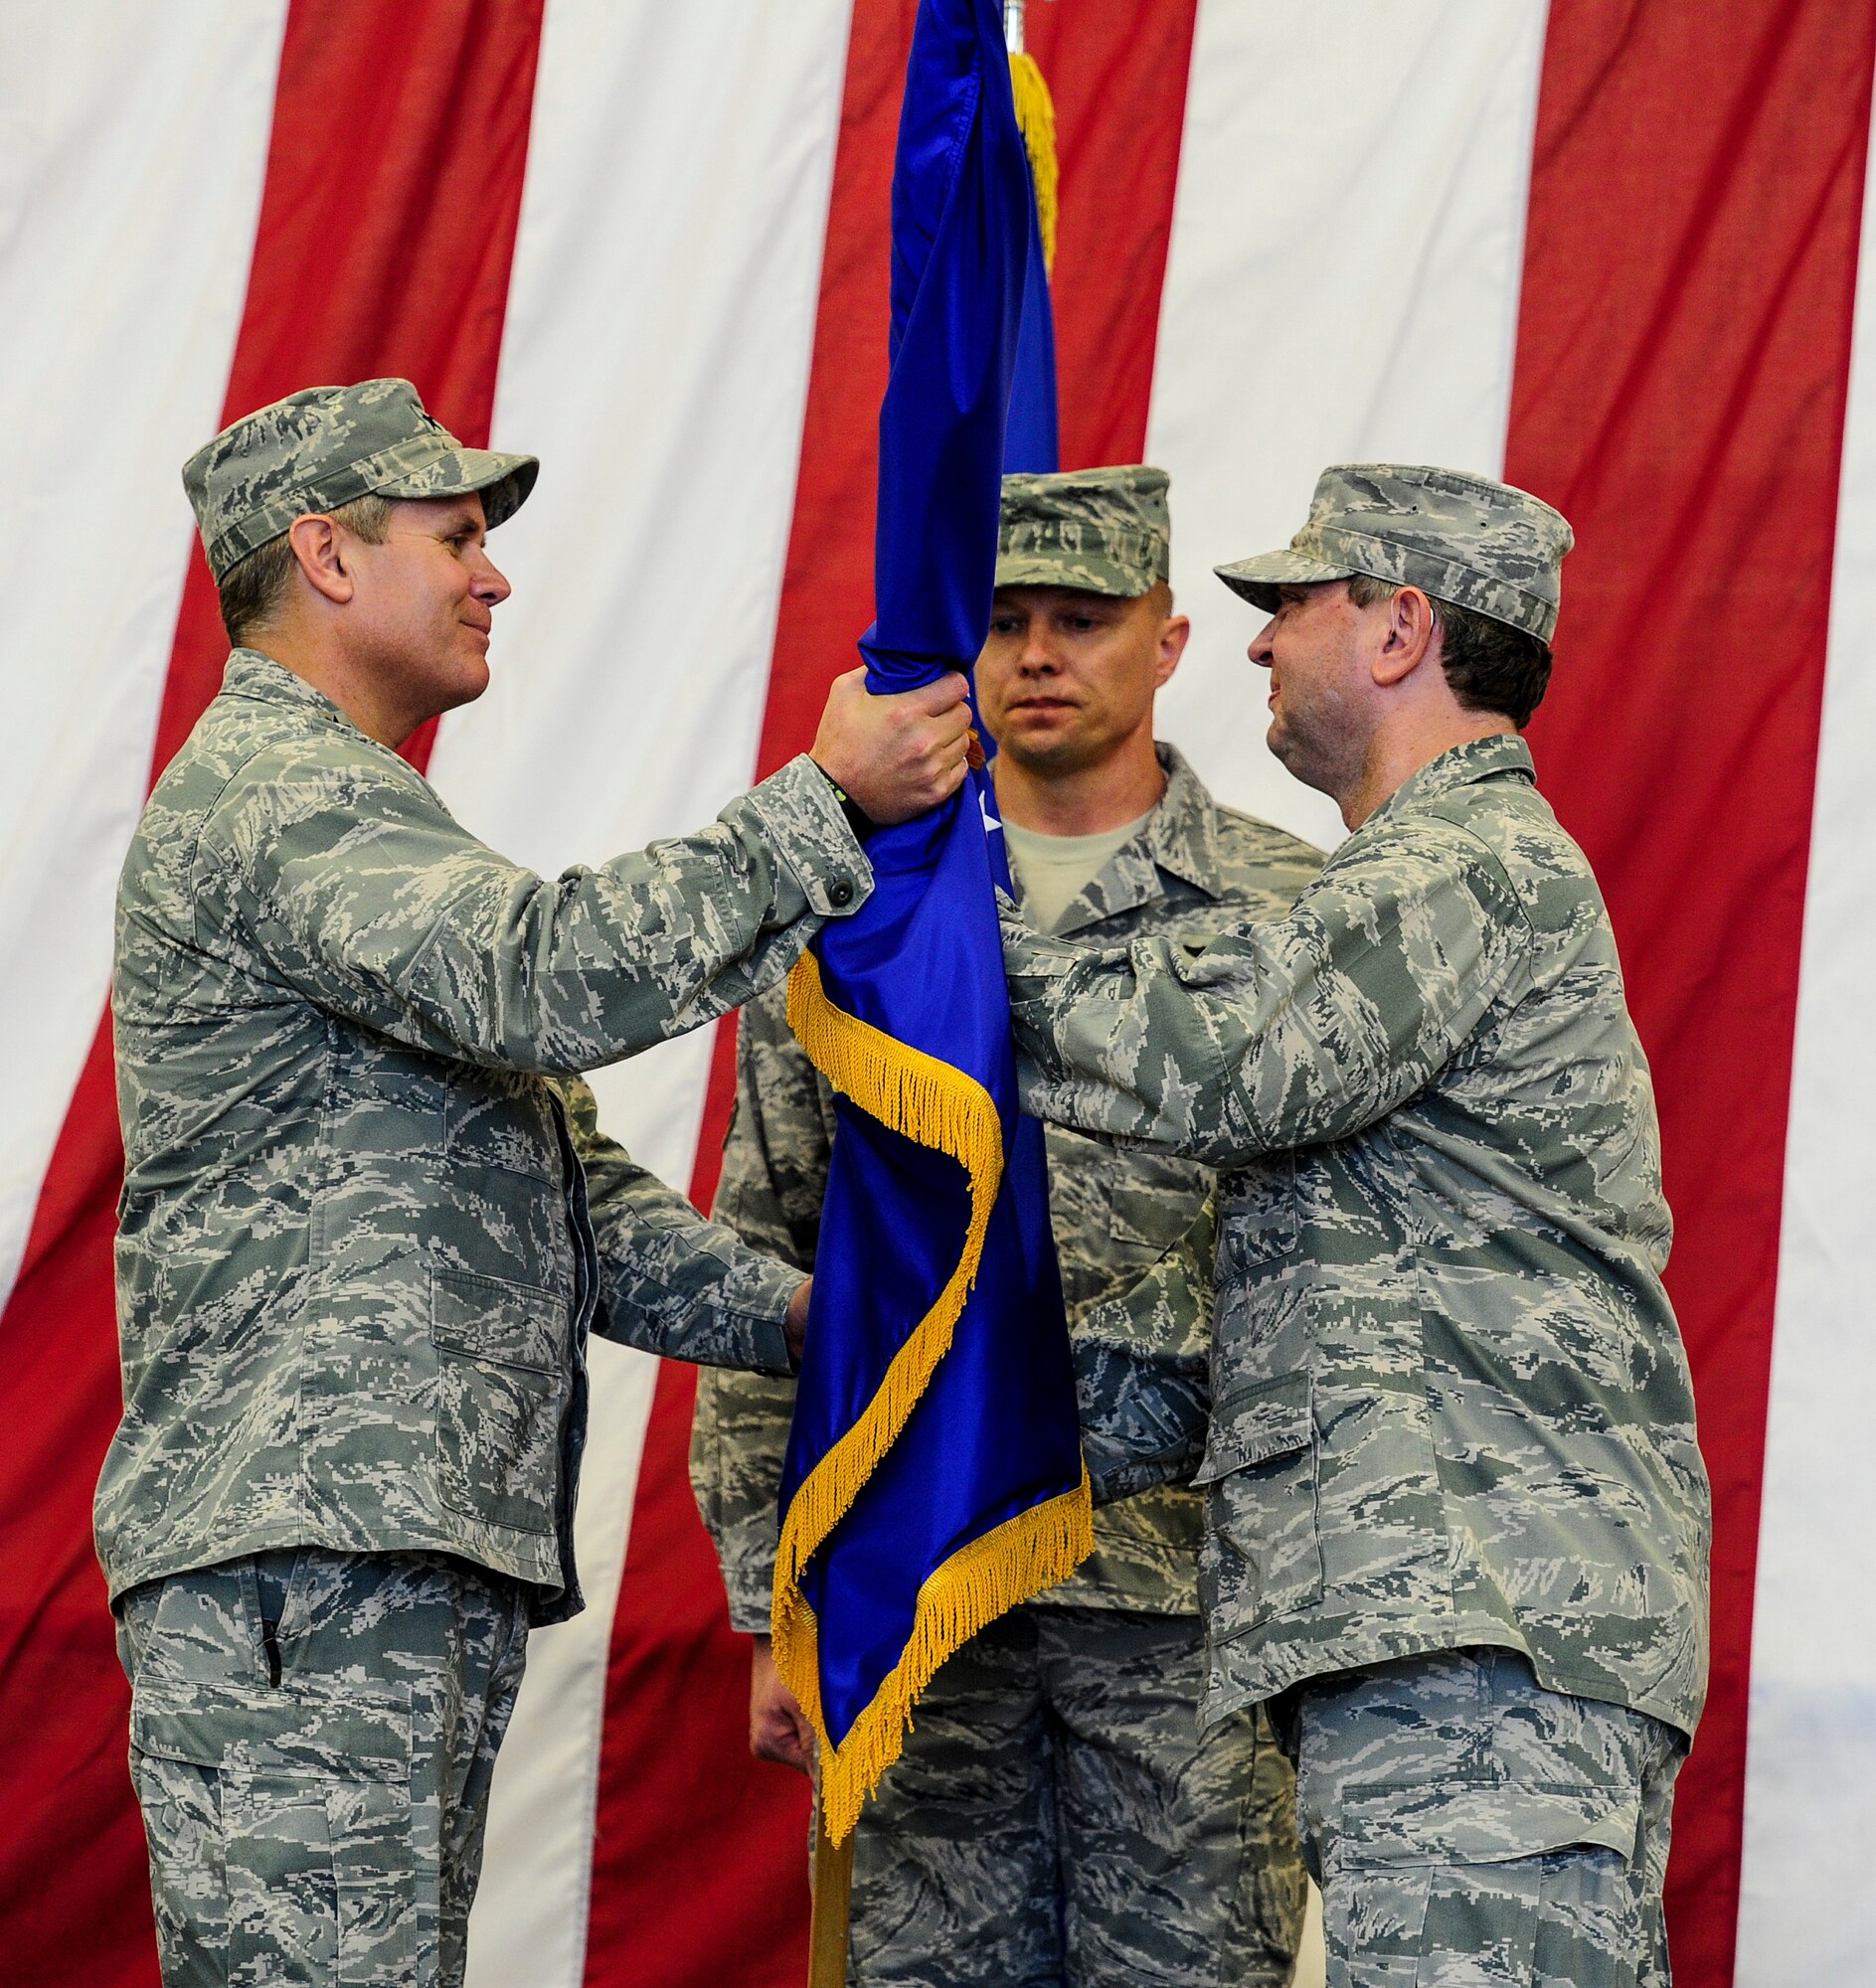 U.S. Air Force Lt. Gen. Eric Fiel, commander of Air Force Special Operations Command, left, takes the Air Force Special Operations Training Center flag from Col. William Andersen, commander of AFSOTC, right, during a ceremony held on Duke Field, Fla., Feb. 11, 2013. The ceremony was held for the deactivation of AFSOTC and the activation and assumption of command of the Air Force Special Operations Air Warfare Center. (U.S. Air Force photo/Airman 1st Class Christopher Callaway)